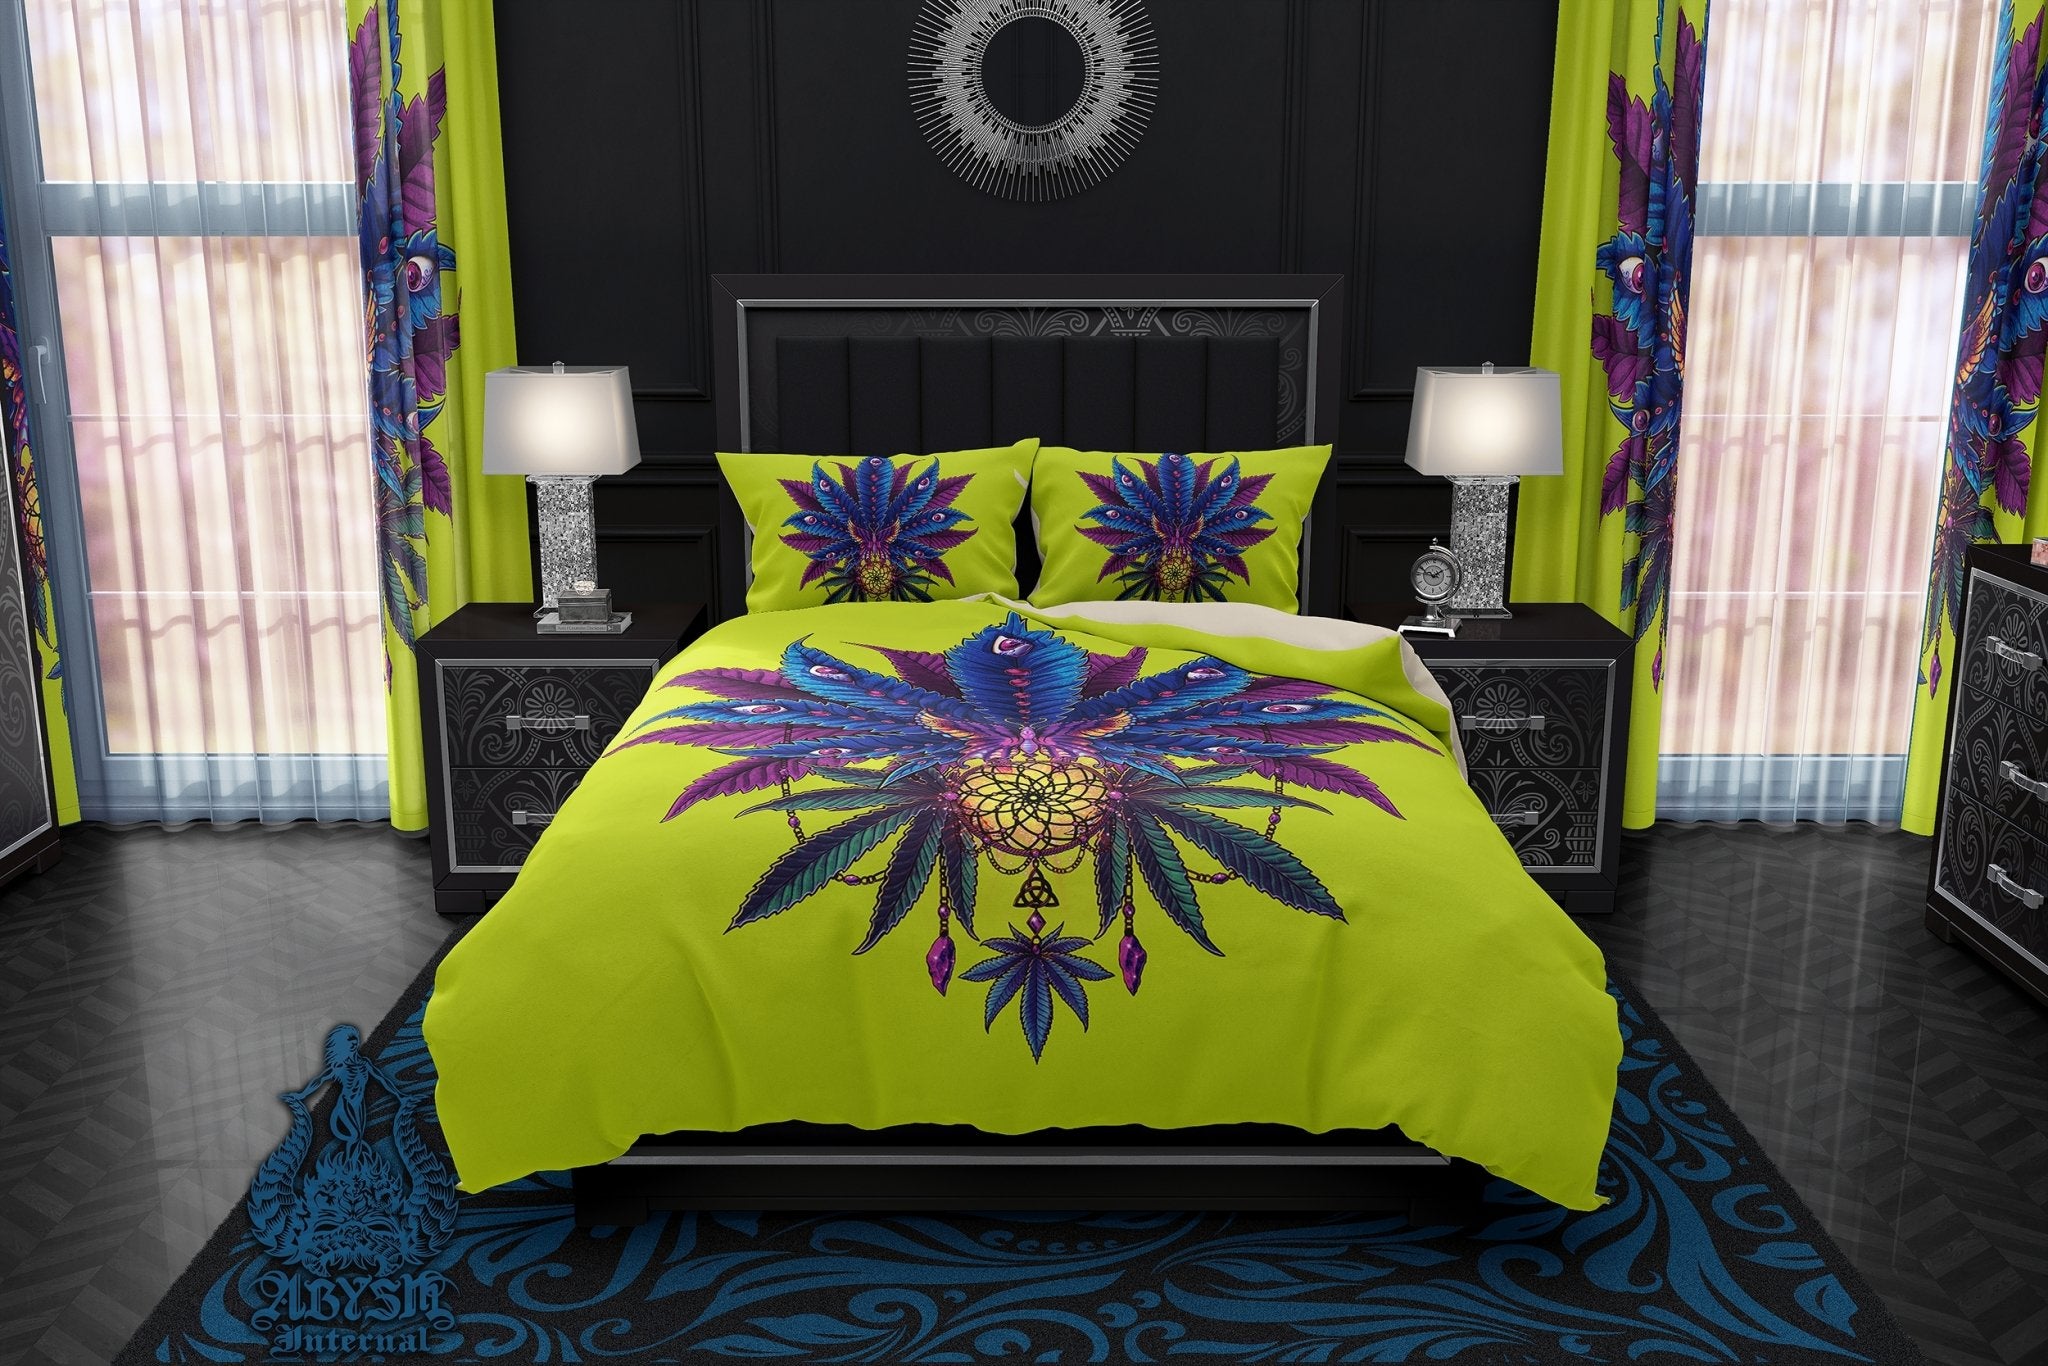 Retro Weed Bedding Set, Comforter and Duvet, Neon Bed Cover and Retrowave Bedroom Decor, King, Queen and Twin Size, Synthwave, Vaporwave 80s Gamer Room Art - Cannabis 420, II - Abysm Internal